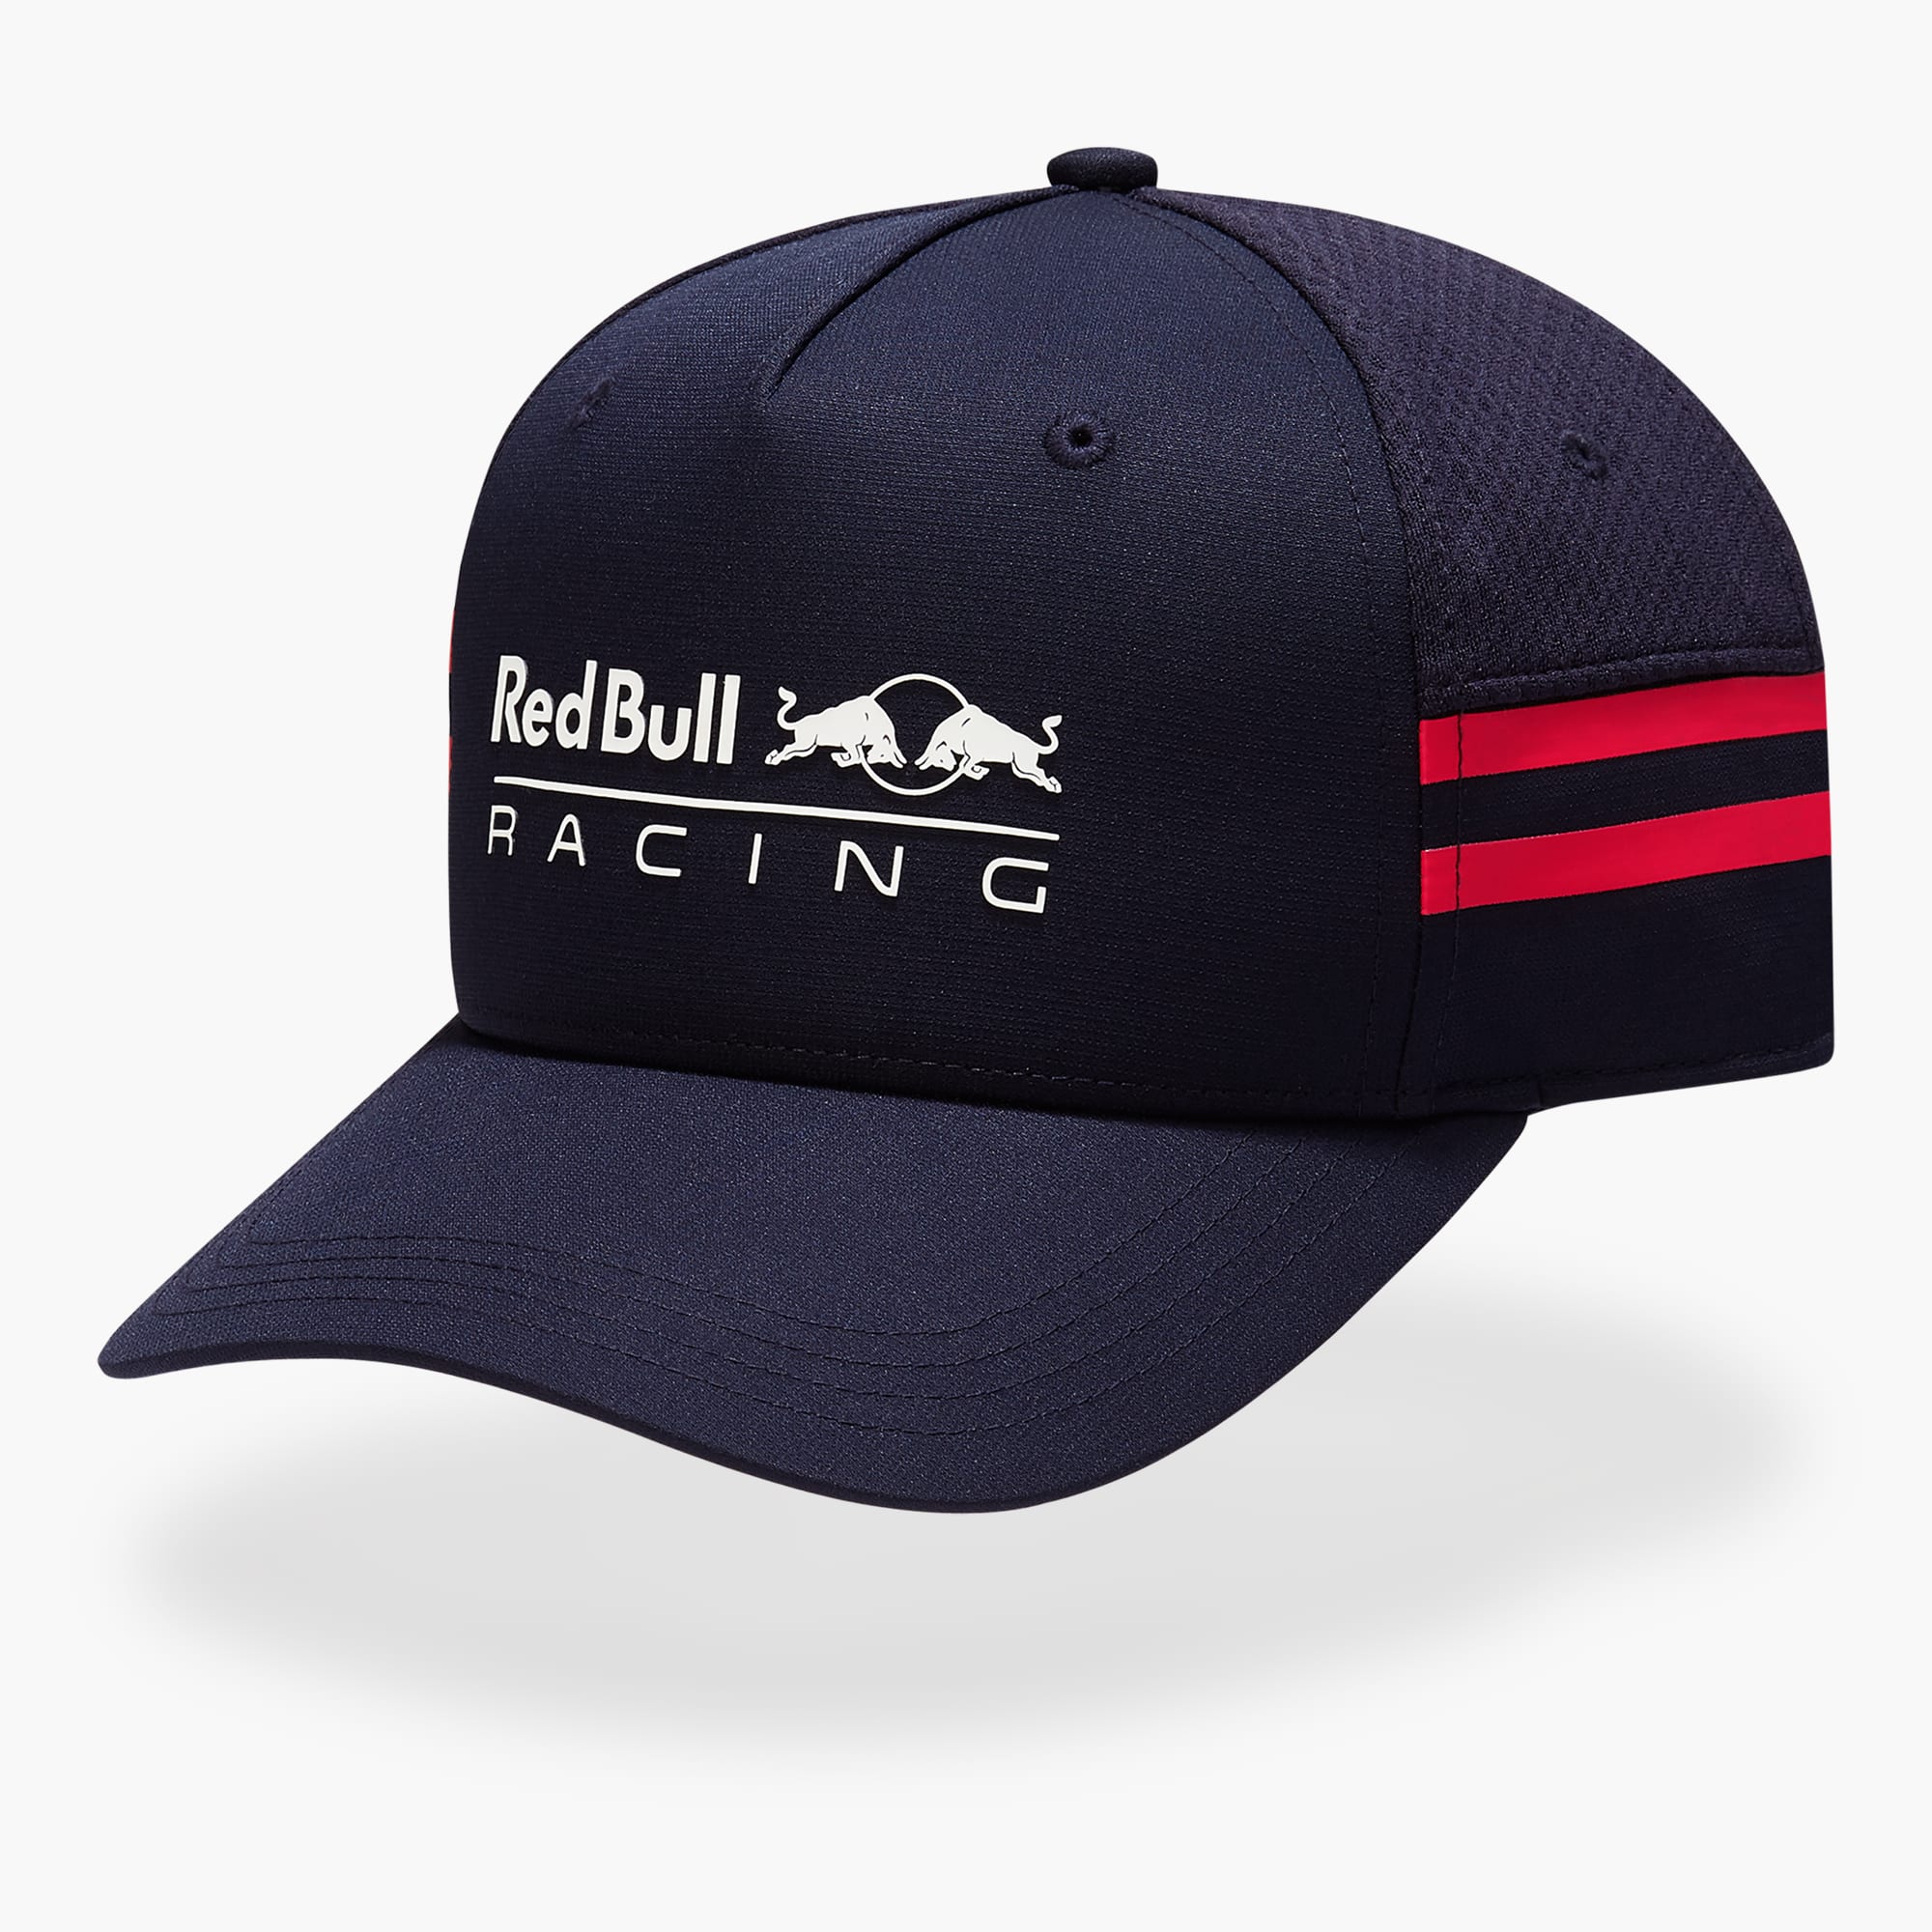 Oracle Red Bull Racing Shop: Injection Cap | only here at redbullshop.com